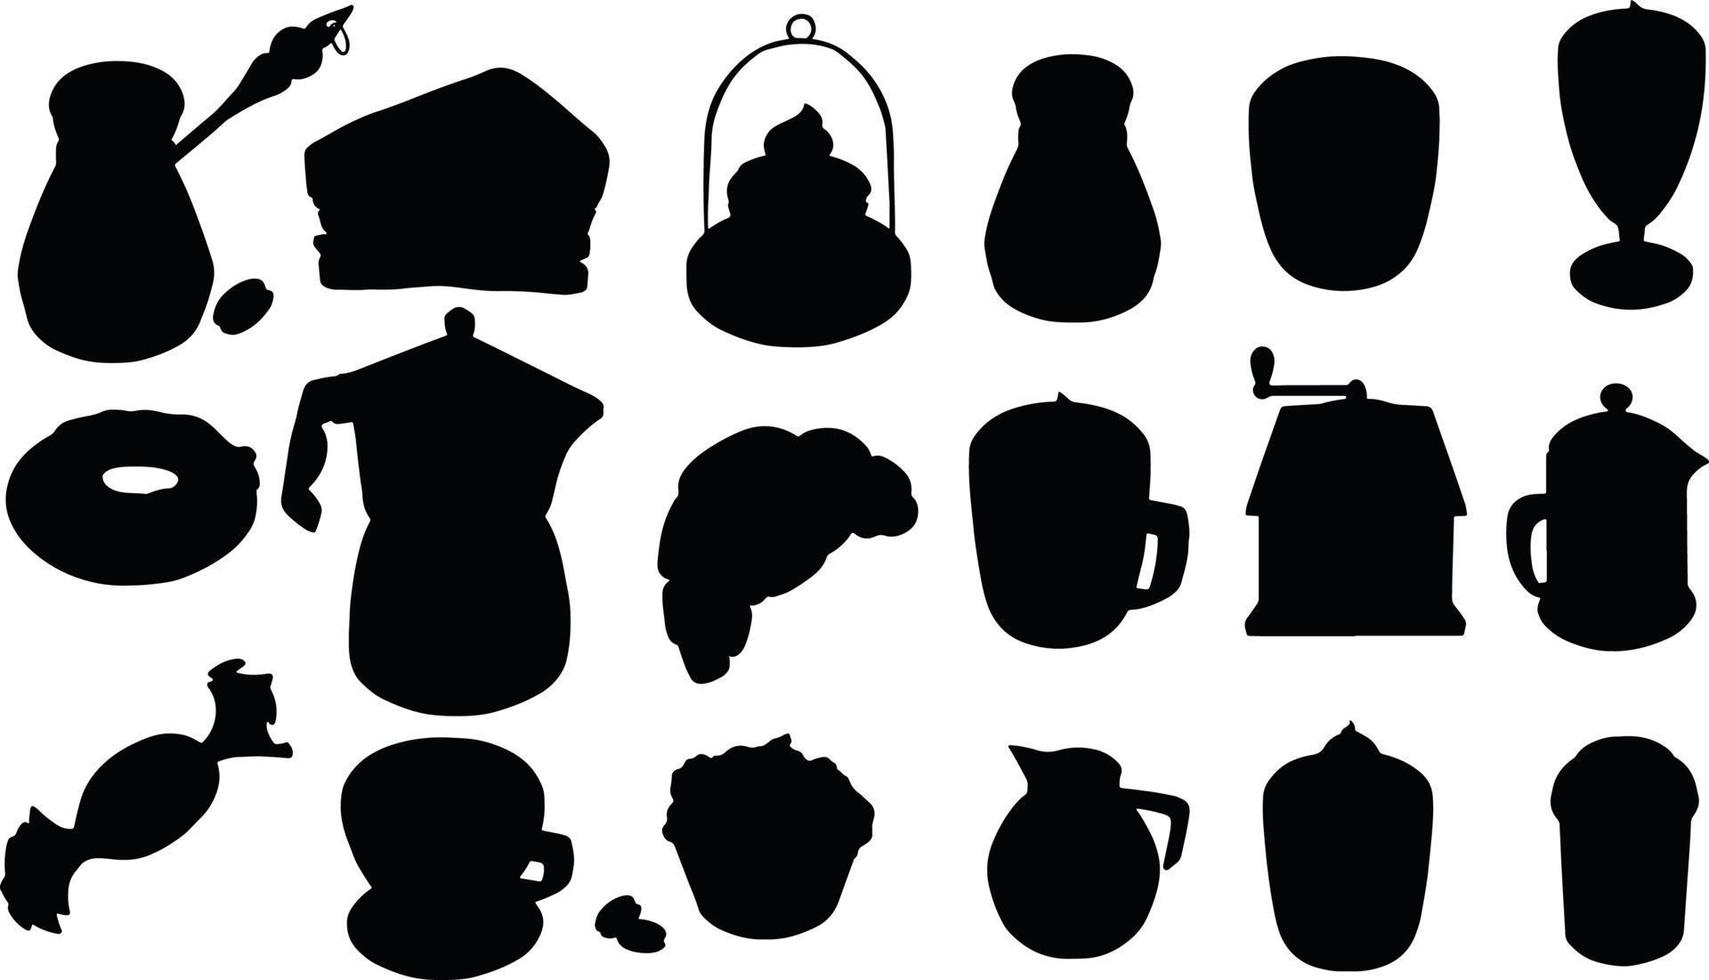 Different shapes of cups. Black silhouettes of mugs. Vector